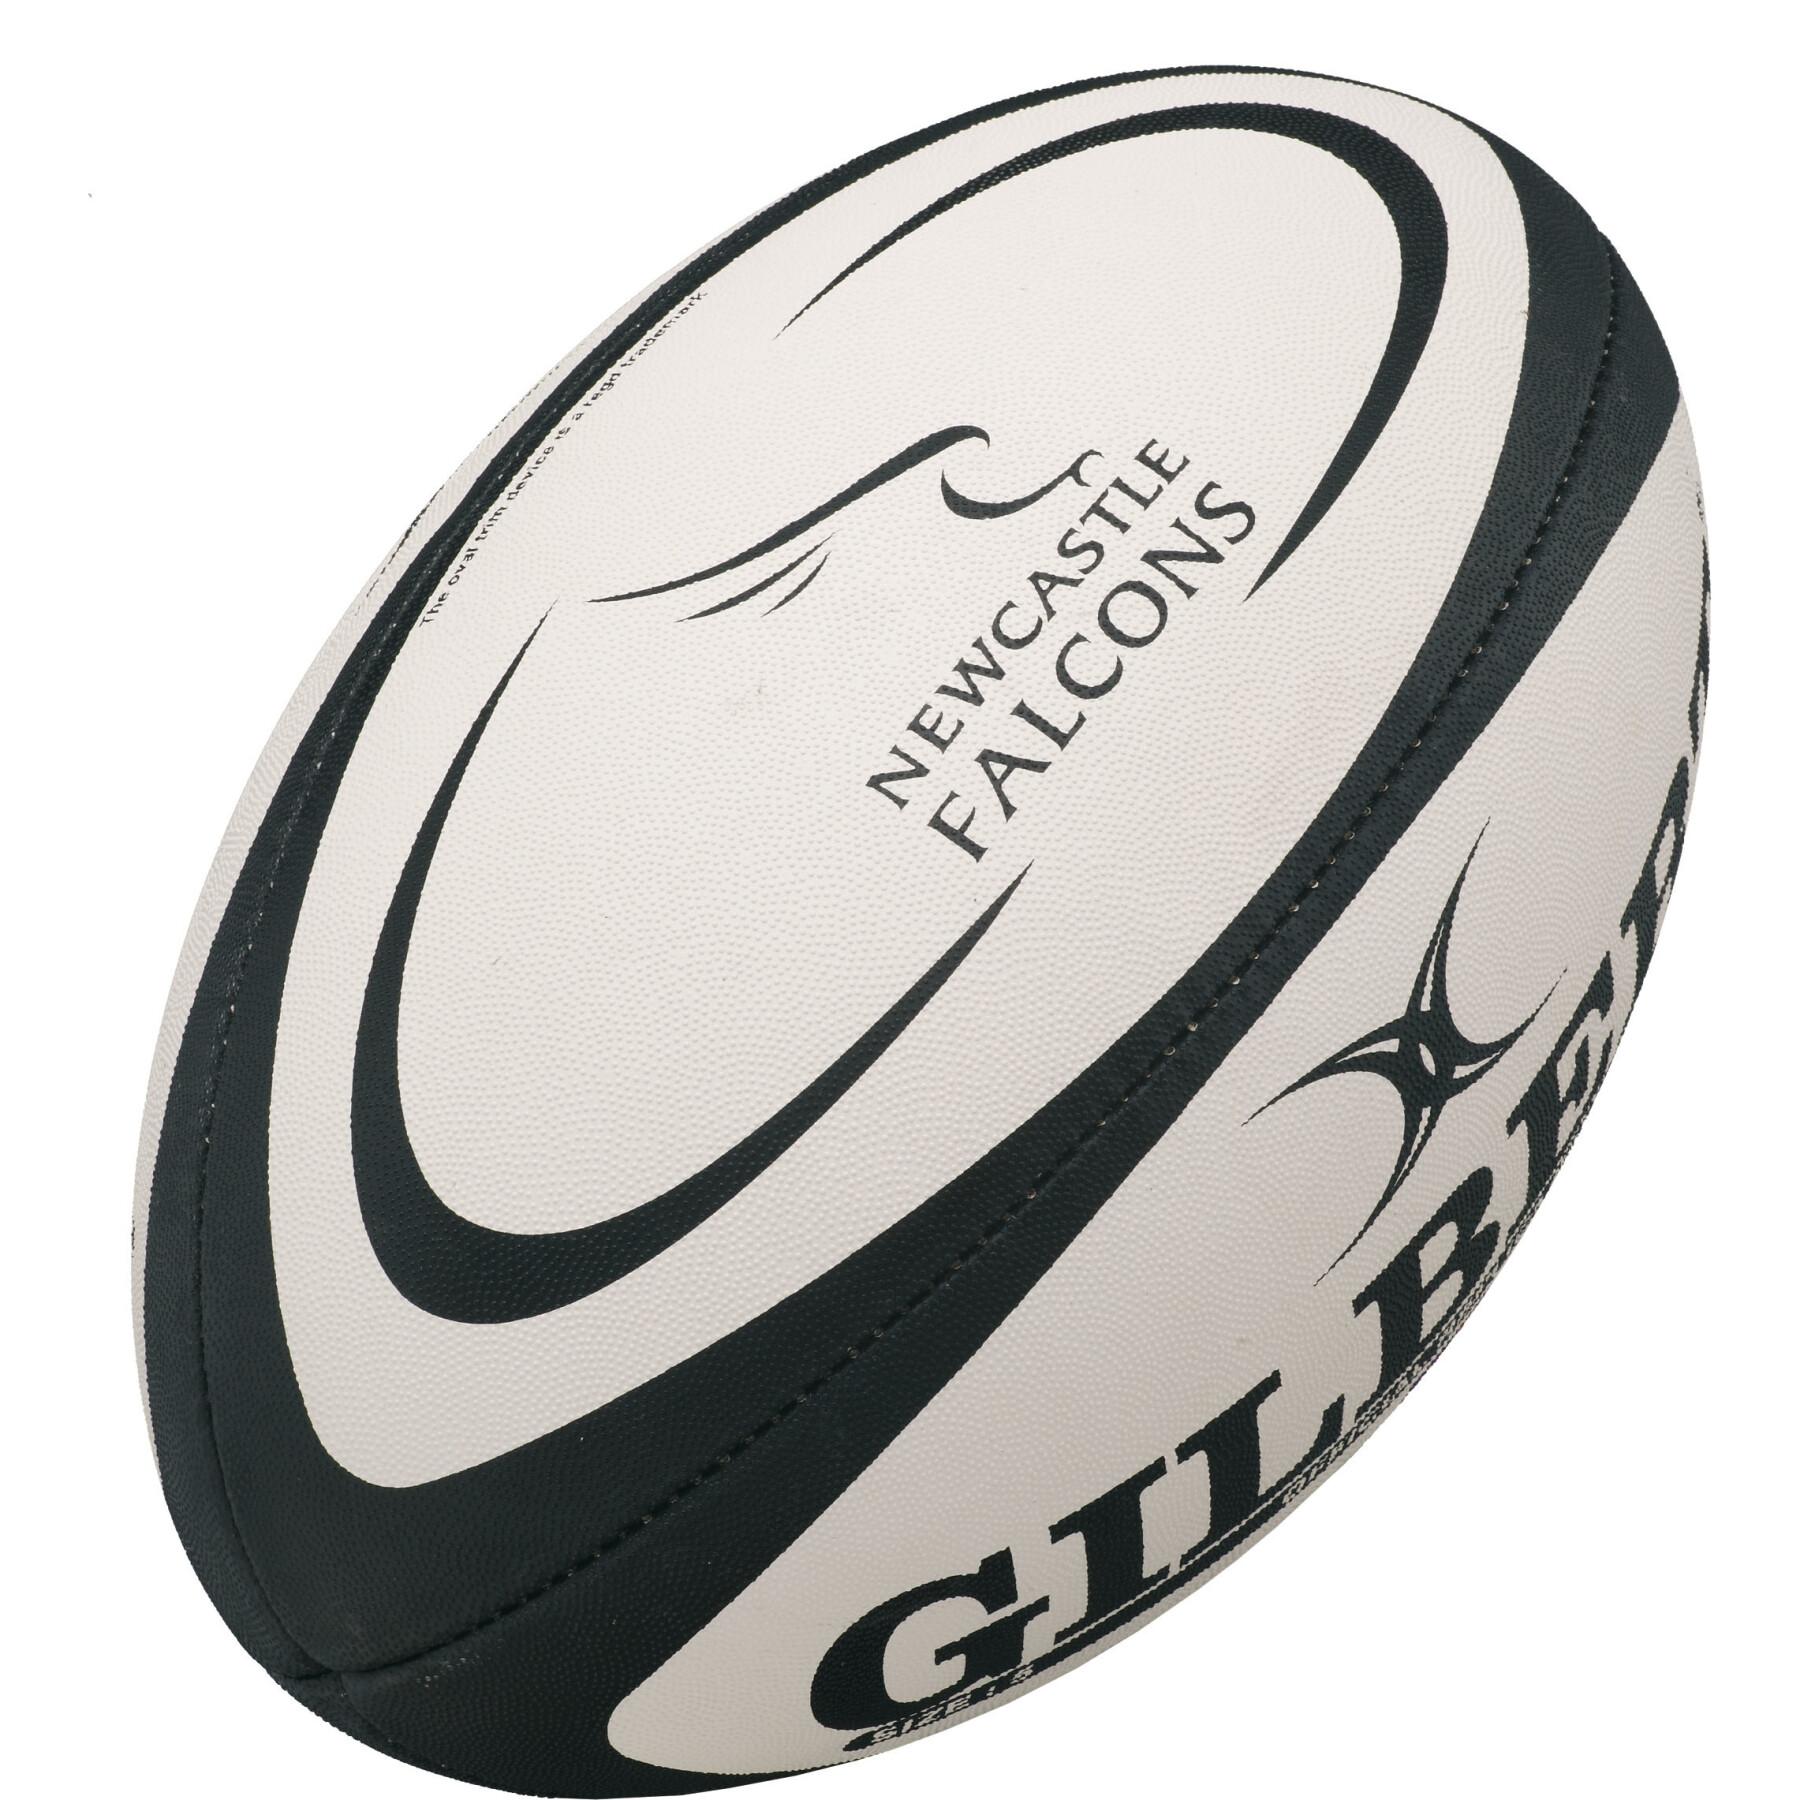 Rugbyball midi Gilbert Newcastle Falcons (taille 2)